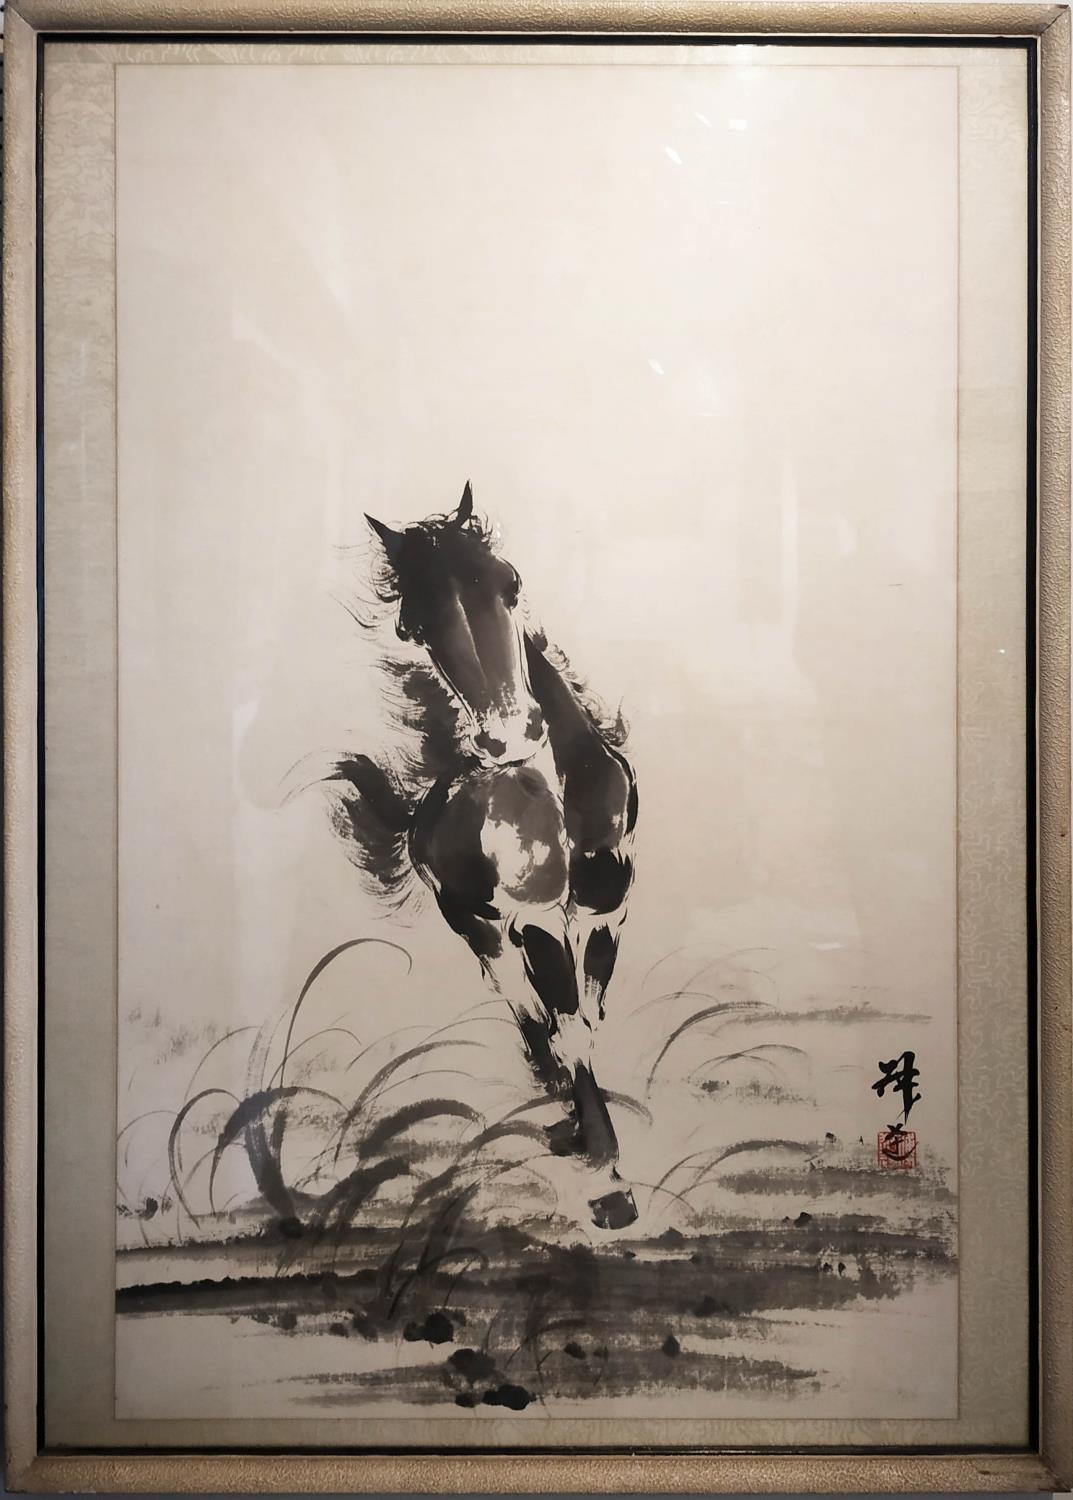 CHINESE SCHOOL 'Galloping Horse', lithograph, 80cm x 50cm, framed and glazed.